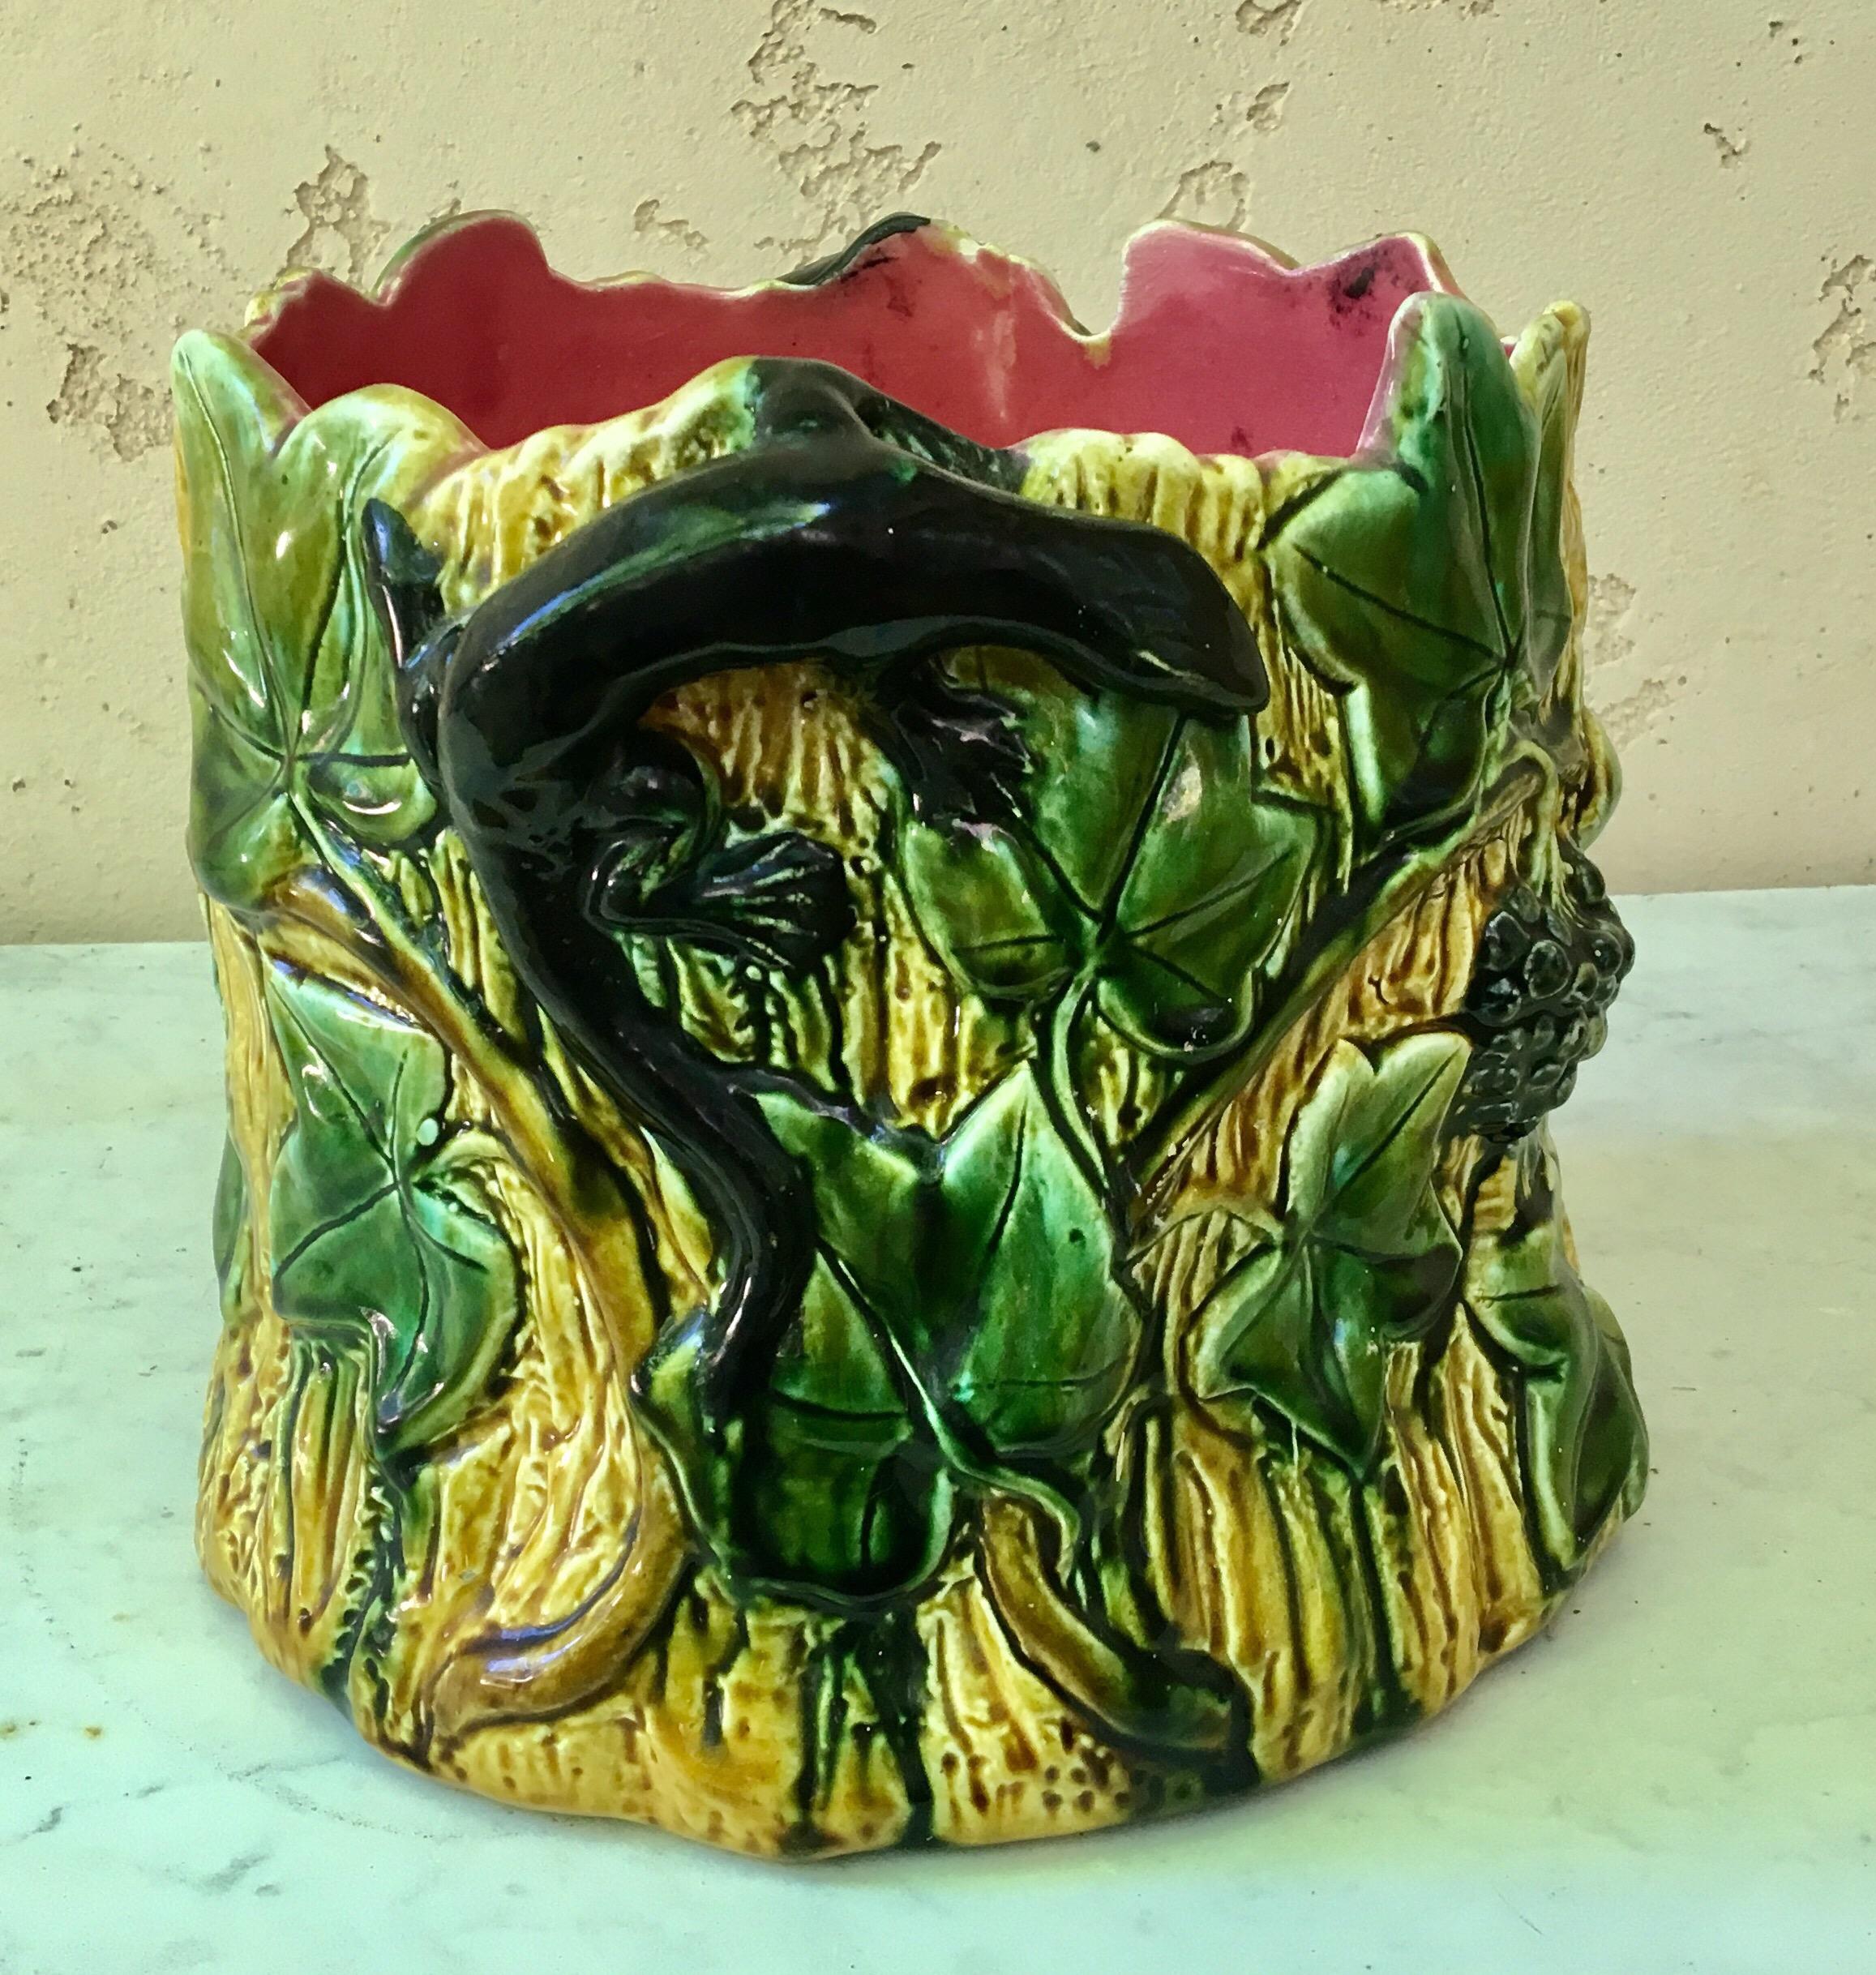 French Majolica planter jardinière with ivy leaves, two blacks lizards on the handles, circa 1880.